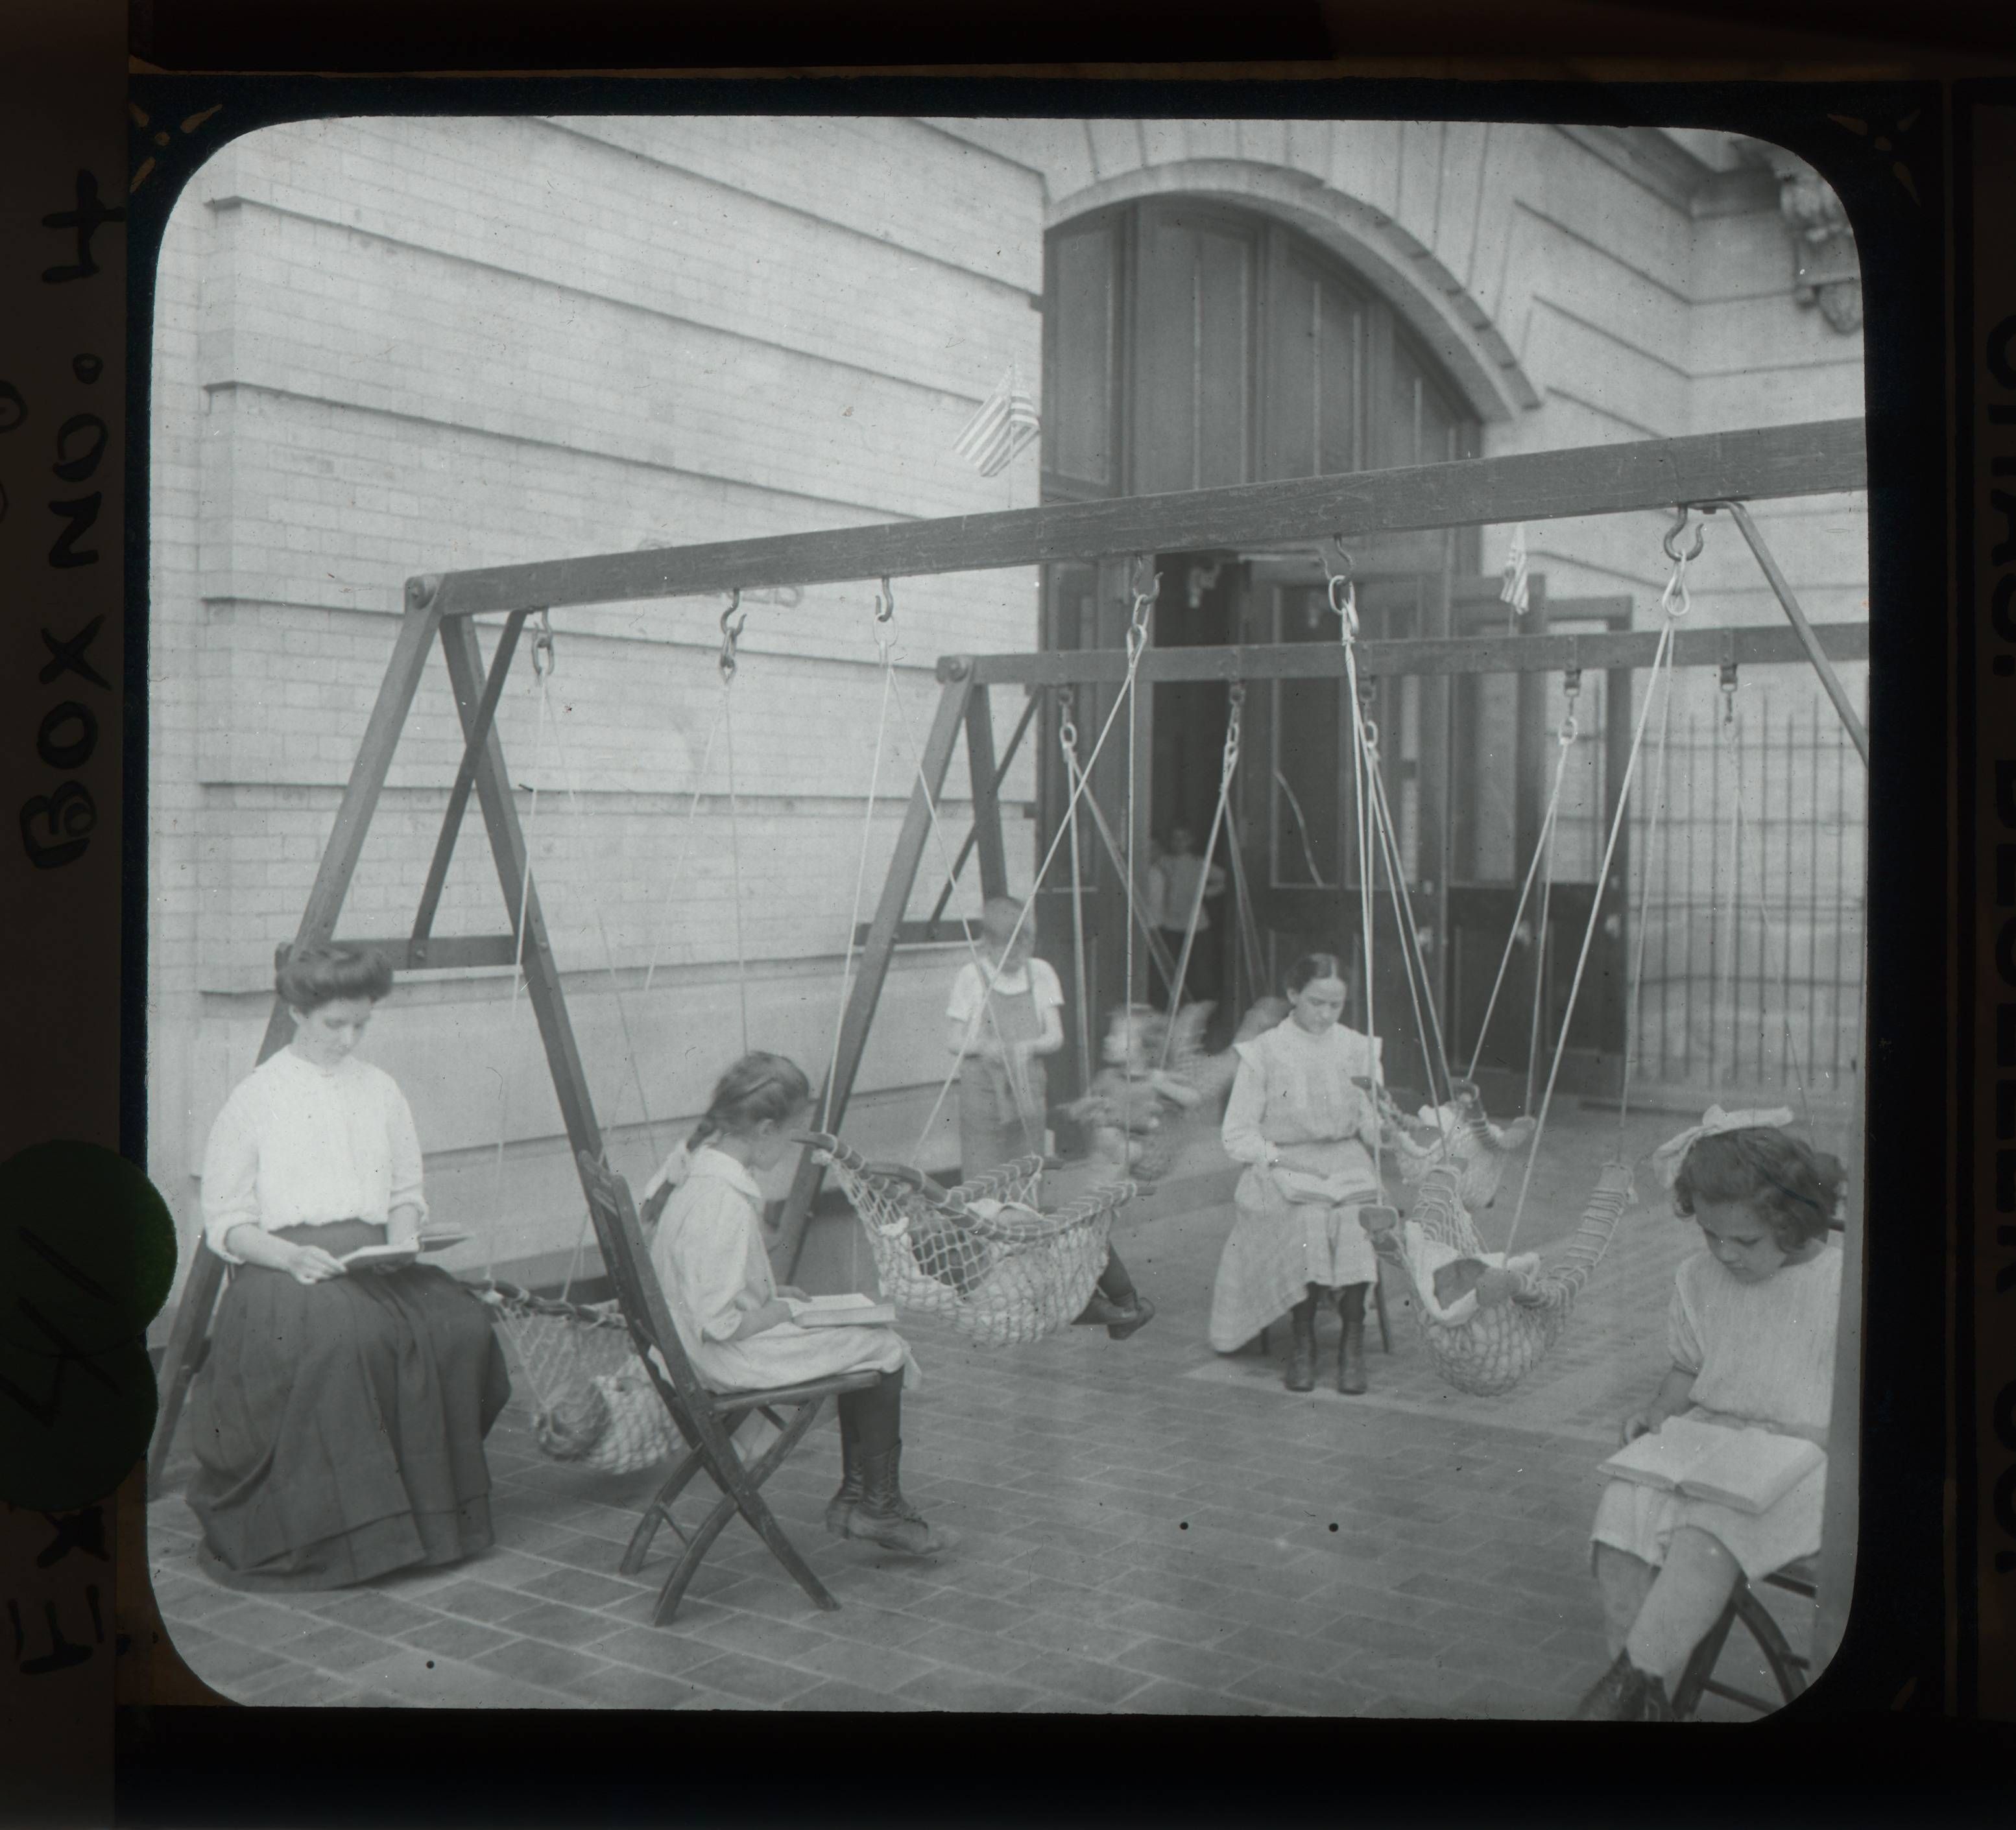 "Women and girls reading near swingset where younger children are suspended in hammock like swings, July 1910" - Lewis Wickes Hine